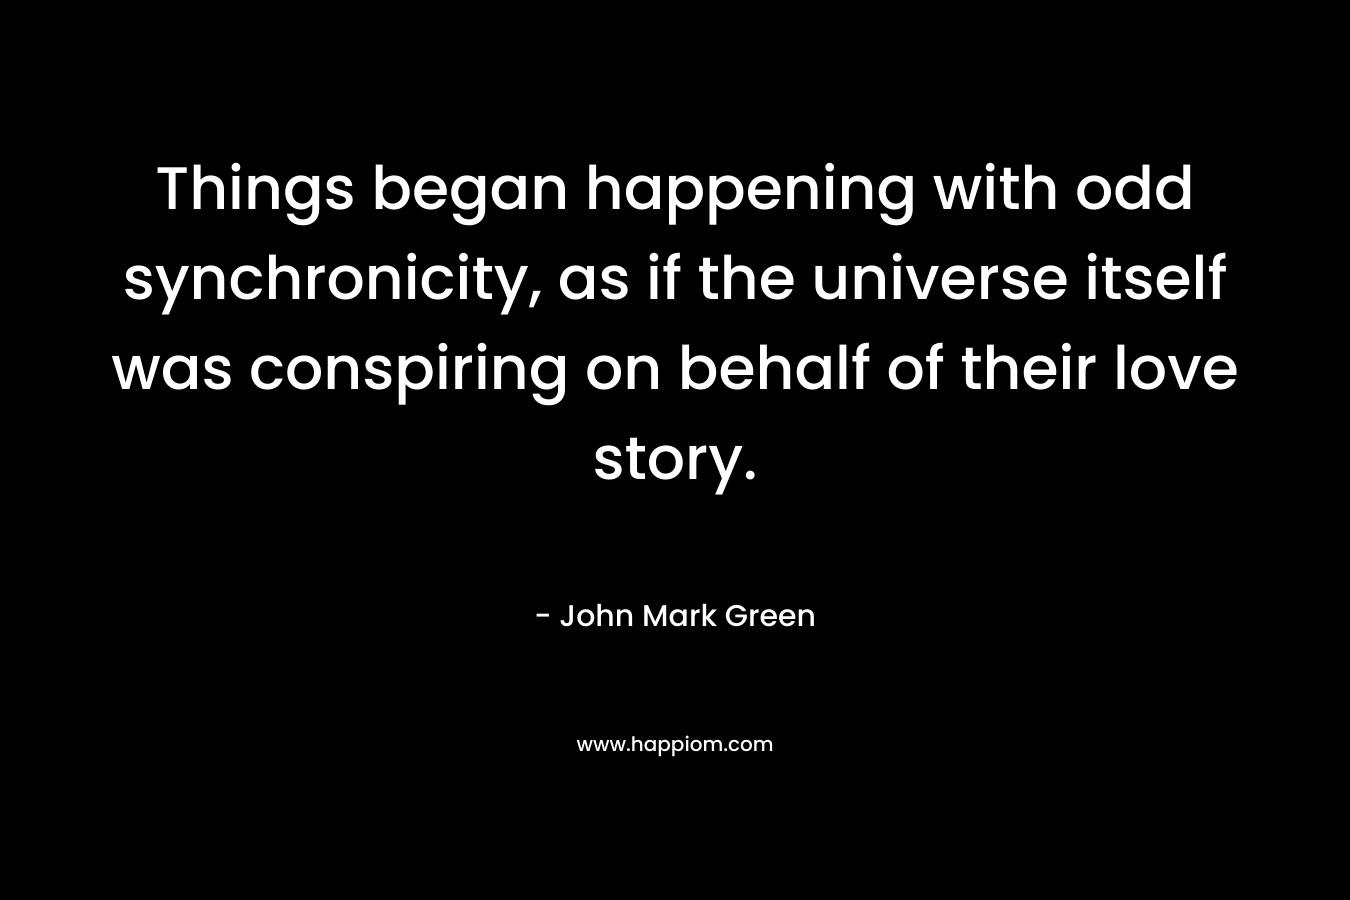 Things began happening with odd synchronicity, as if the universe itself was conspiring on behalf of their love story. – John Mark Green